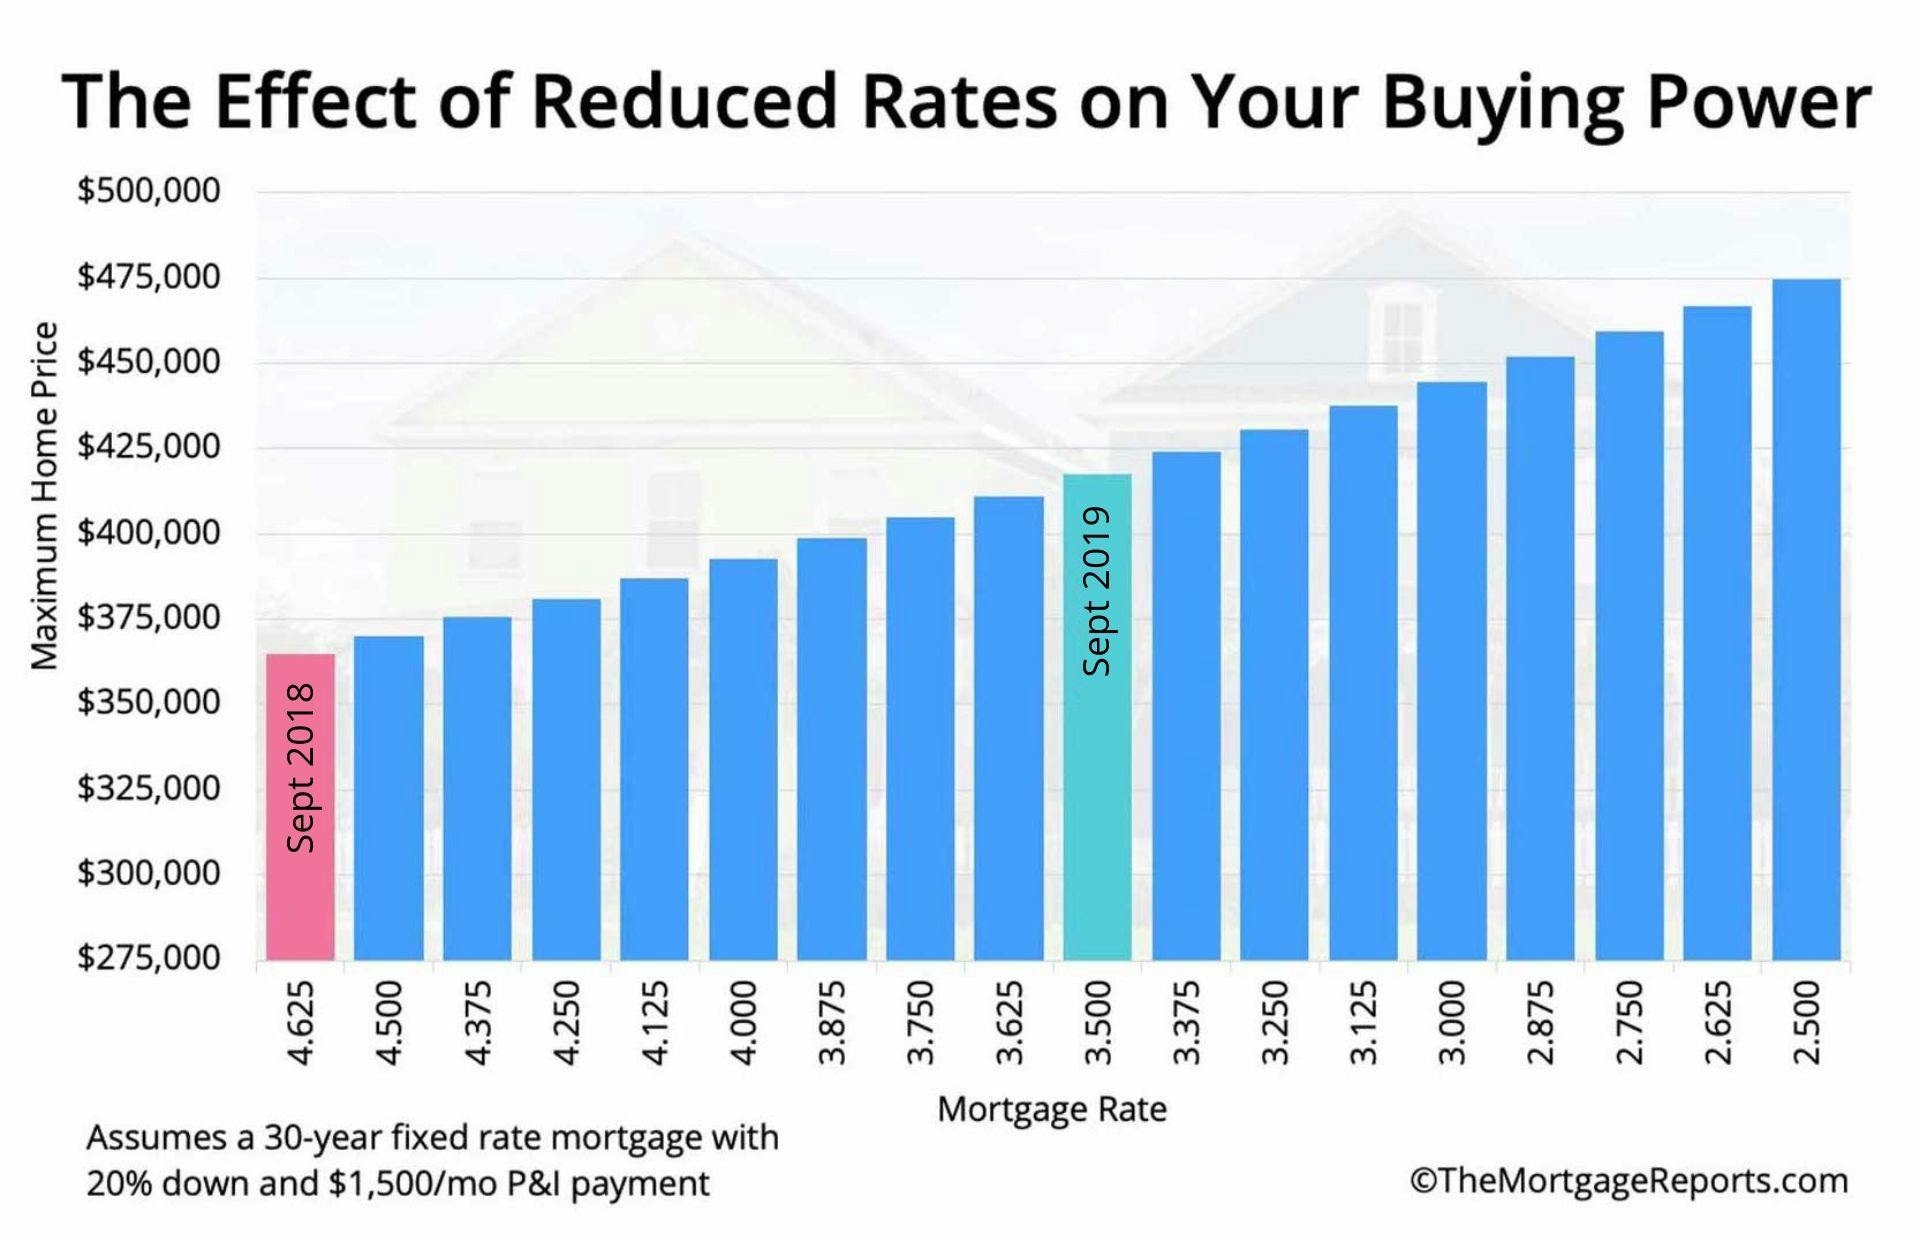 The Effect of Reduced Mortgage Rates on Your Home Buying Power in 2020